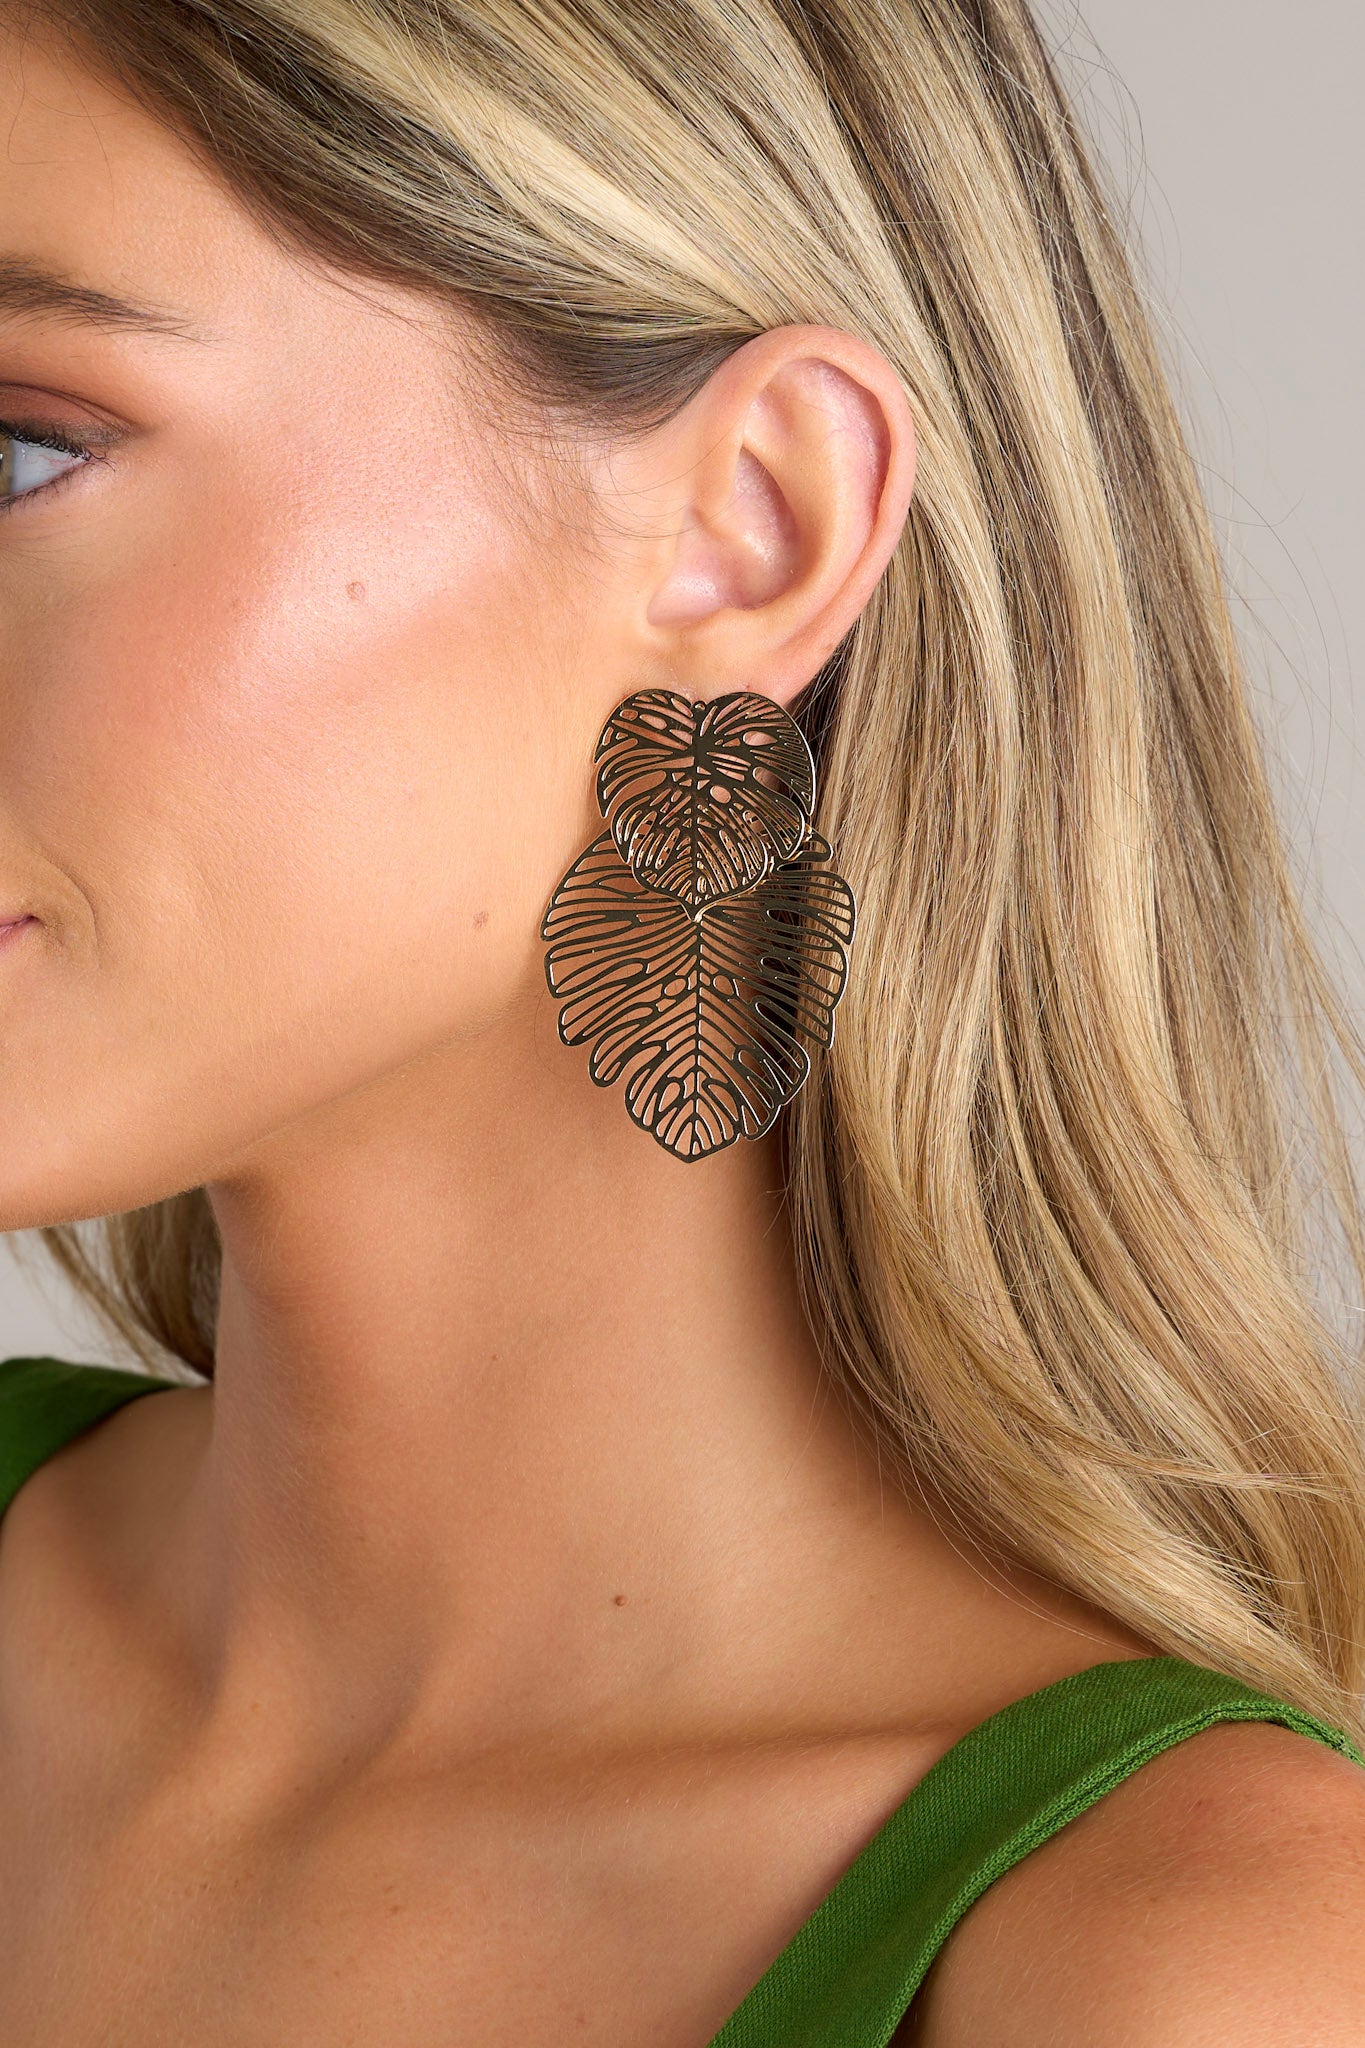 These gold earrings feature a layered transparent monstera leaf design, a lightweight material, and secure post backings.